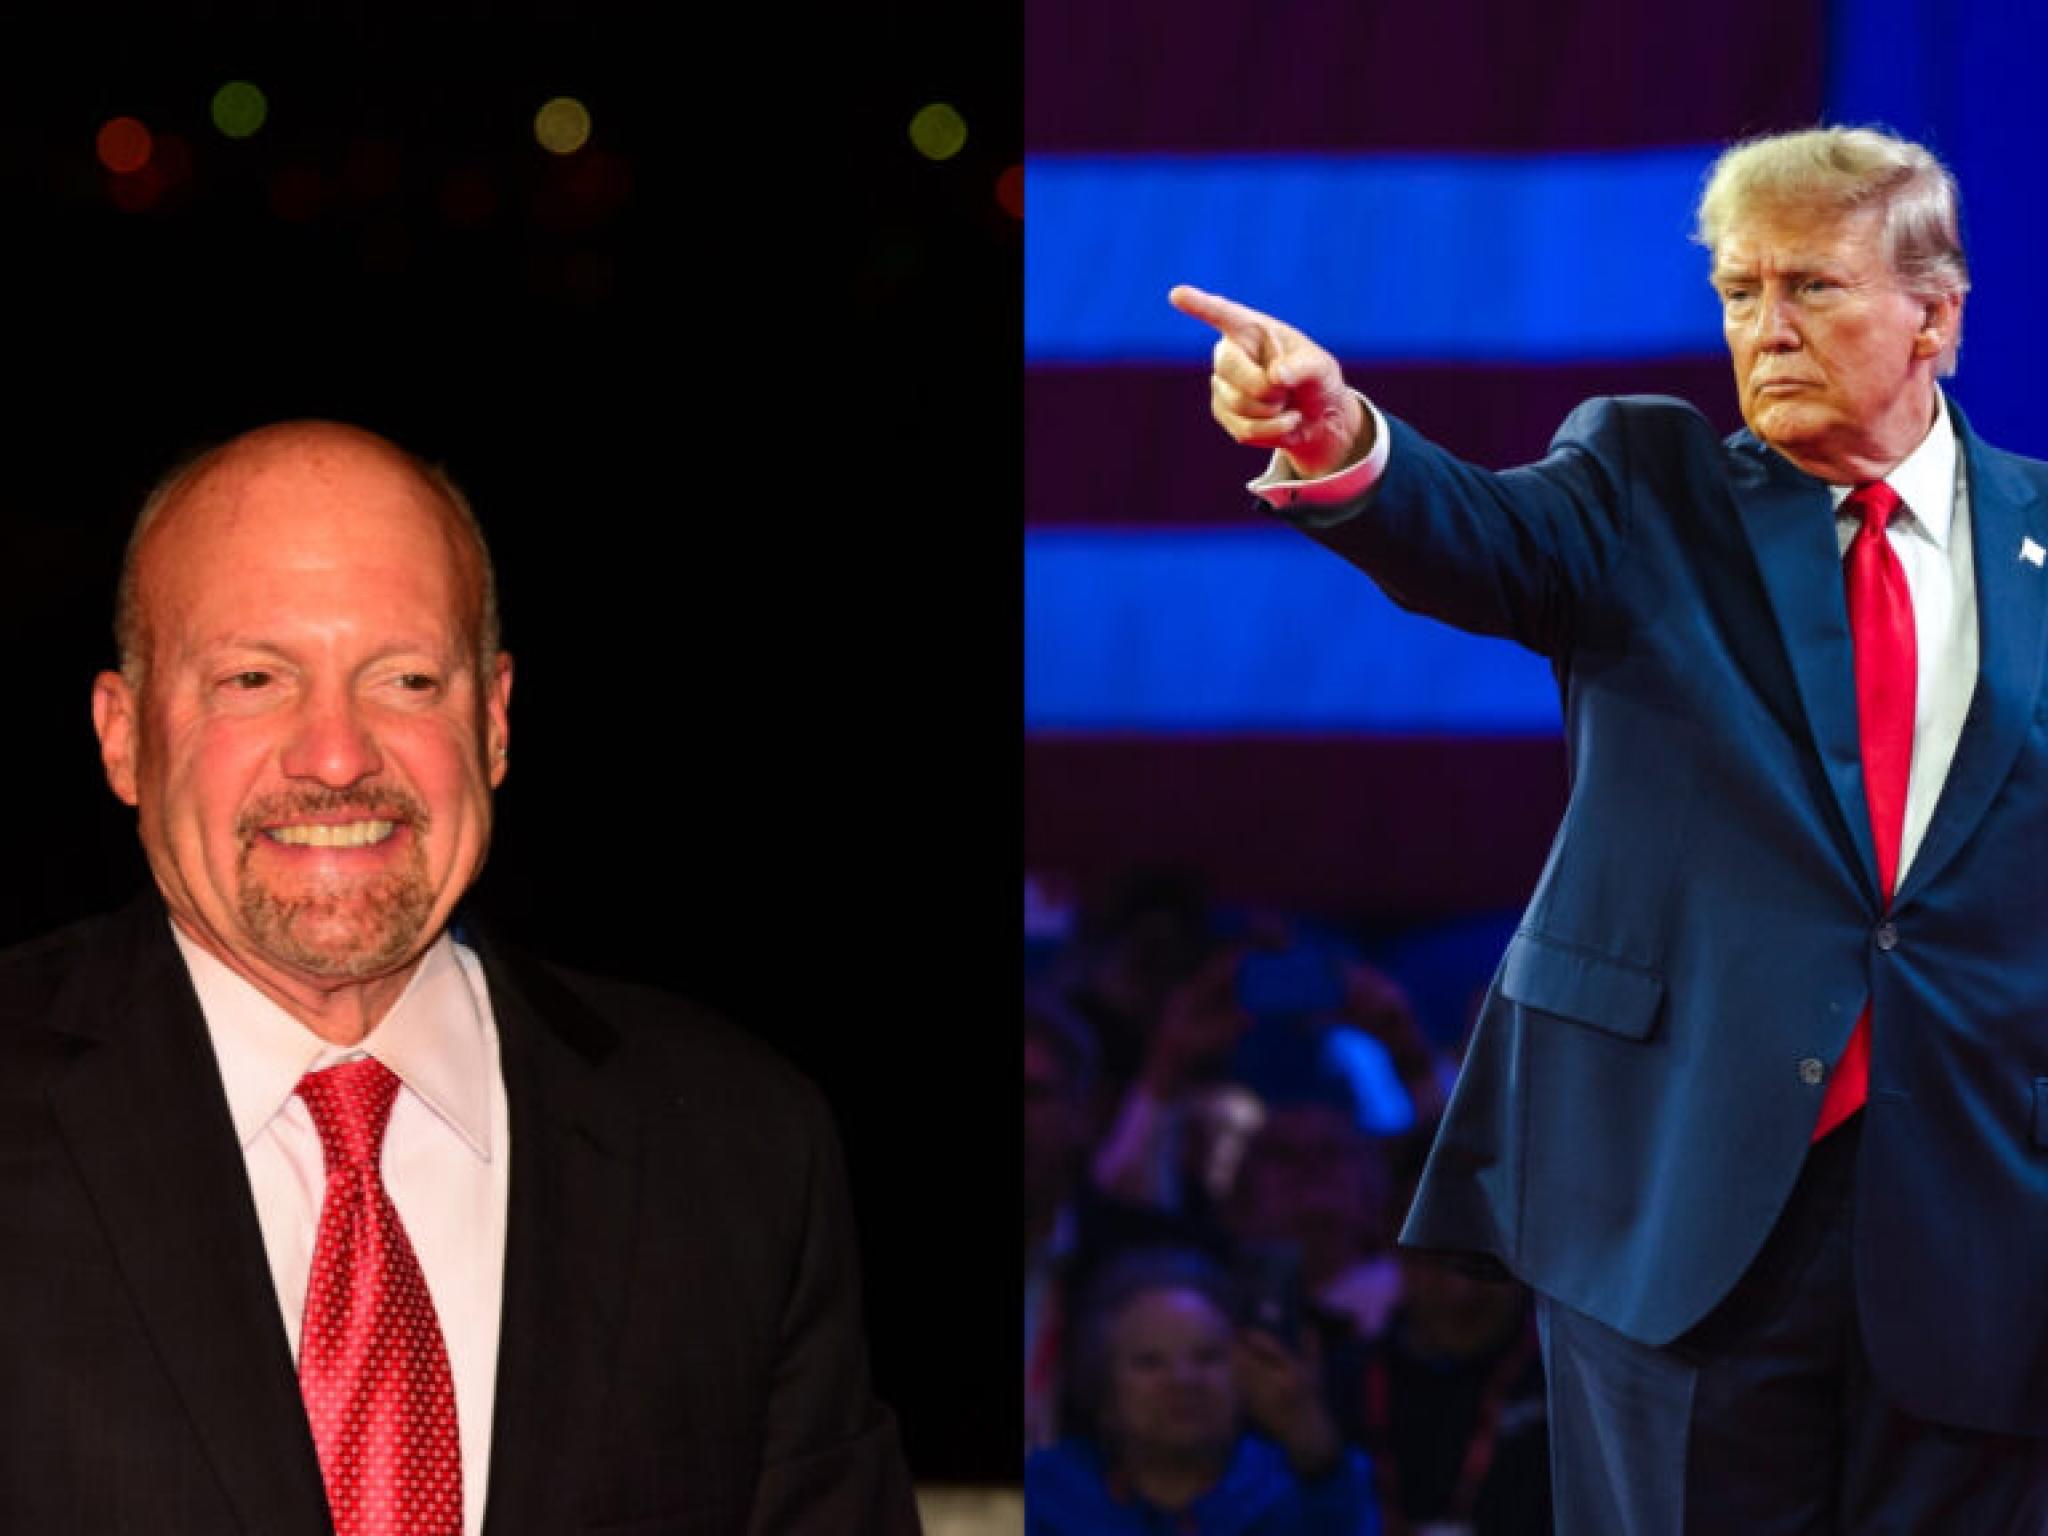  jim-cramer-says-trumps-return-to-white-house-could-be-good-for-your-portfolio-hate-him-or-like-him 